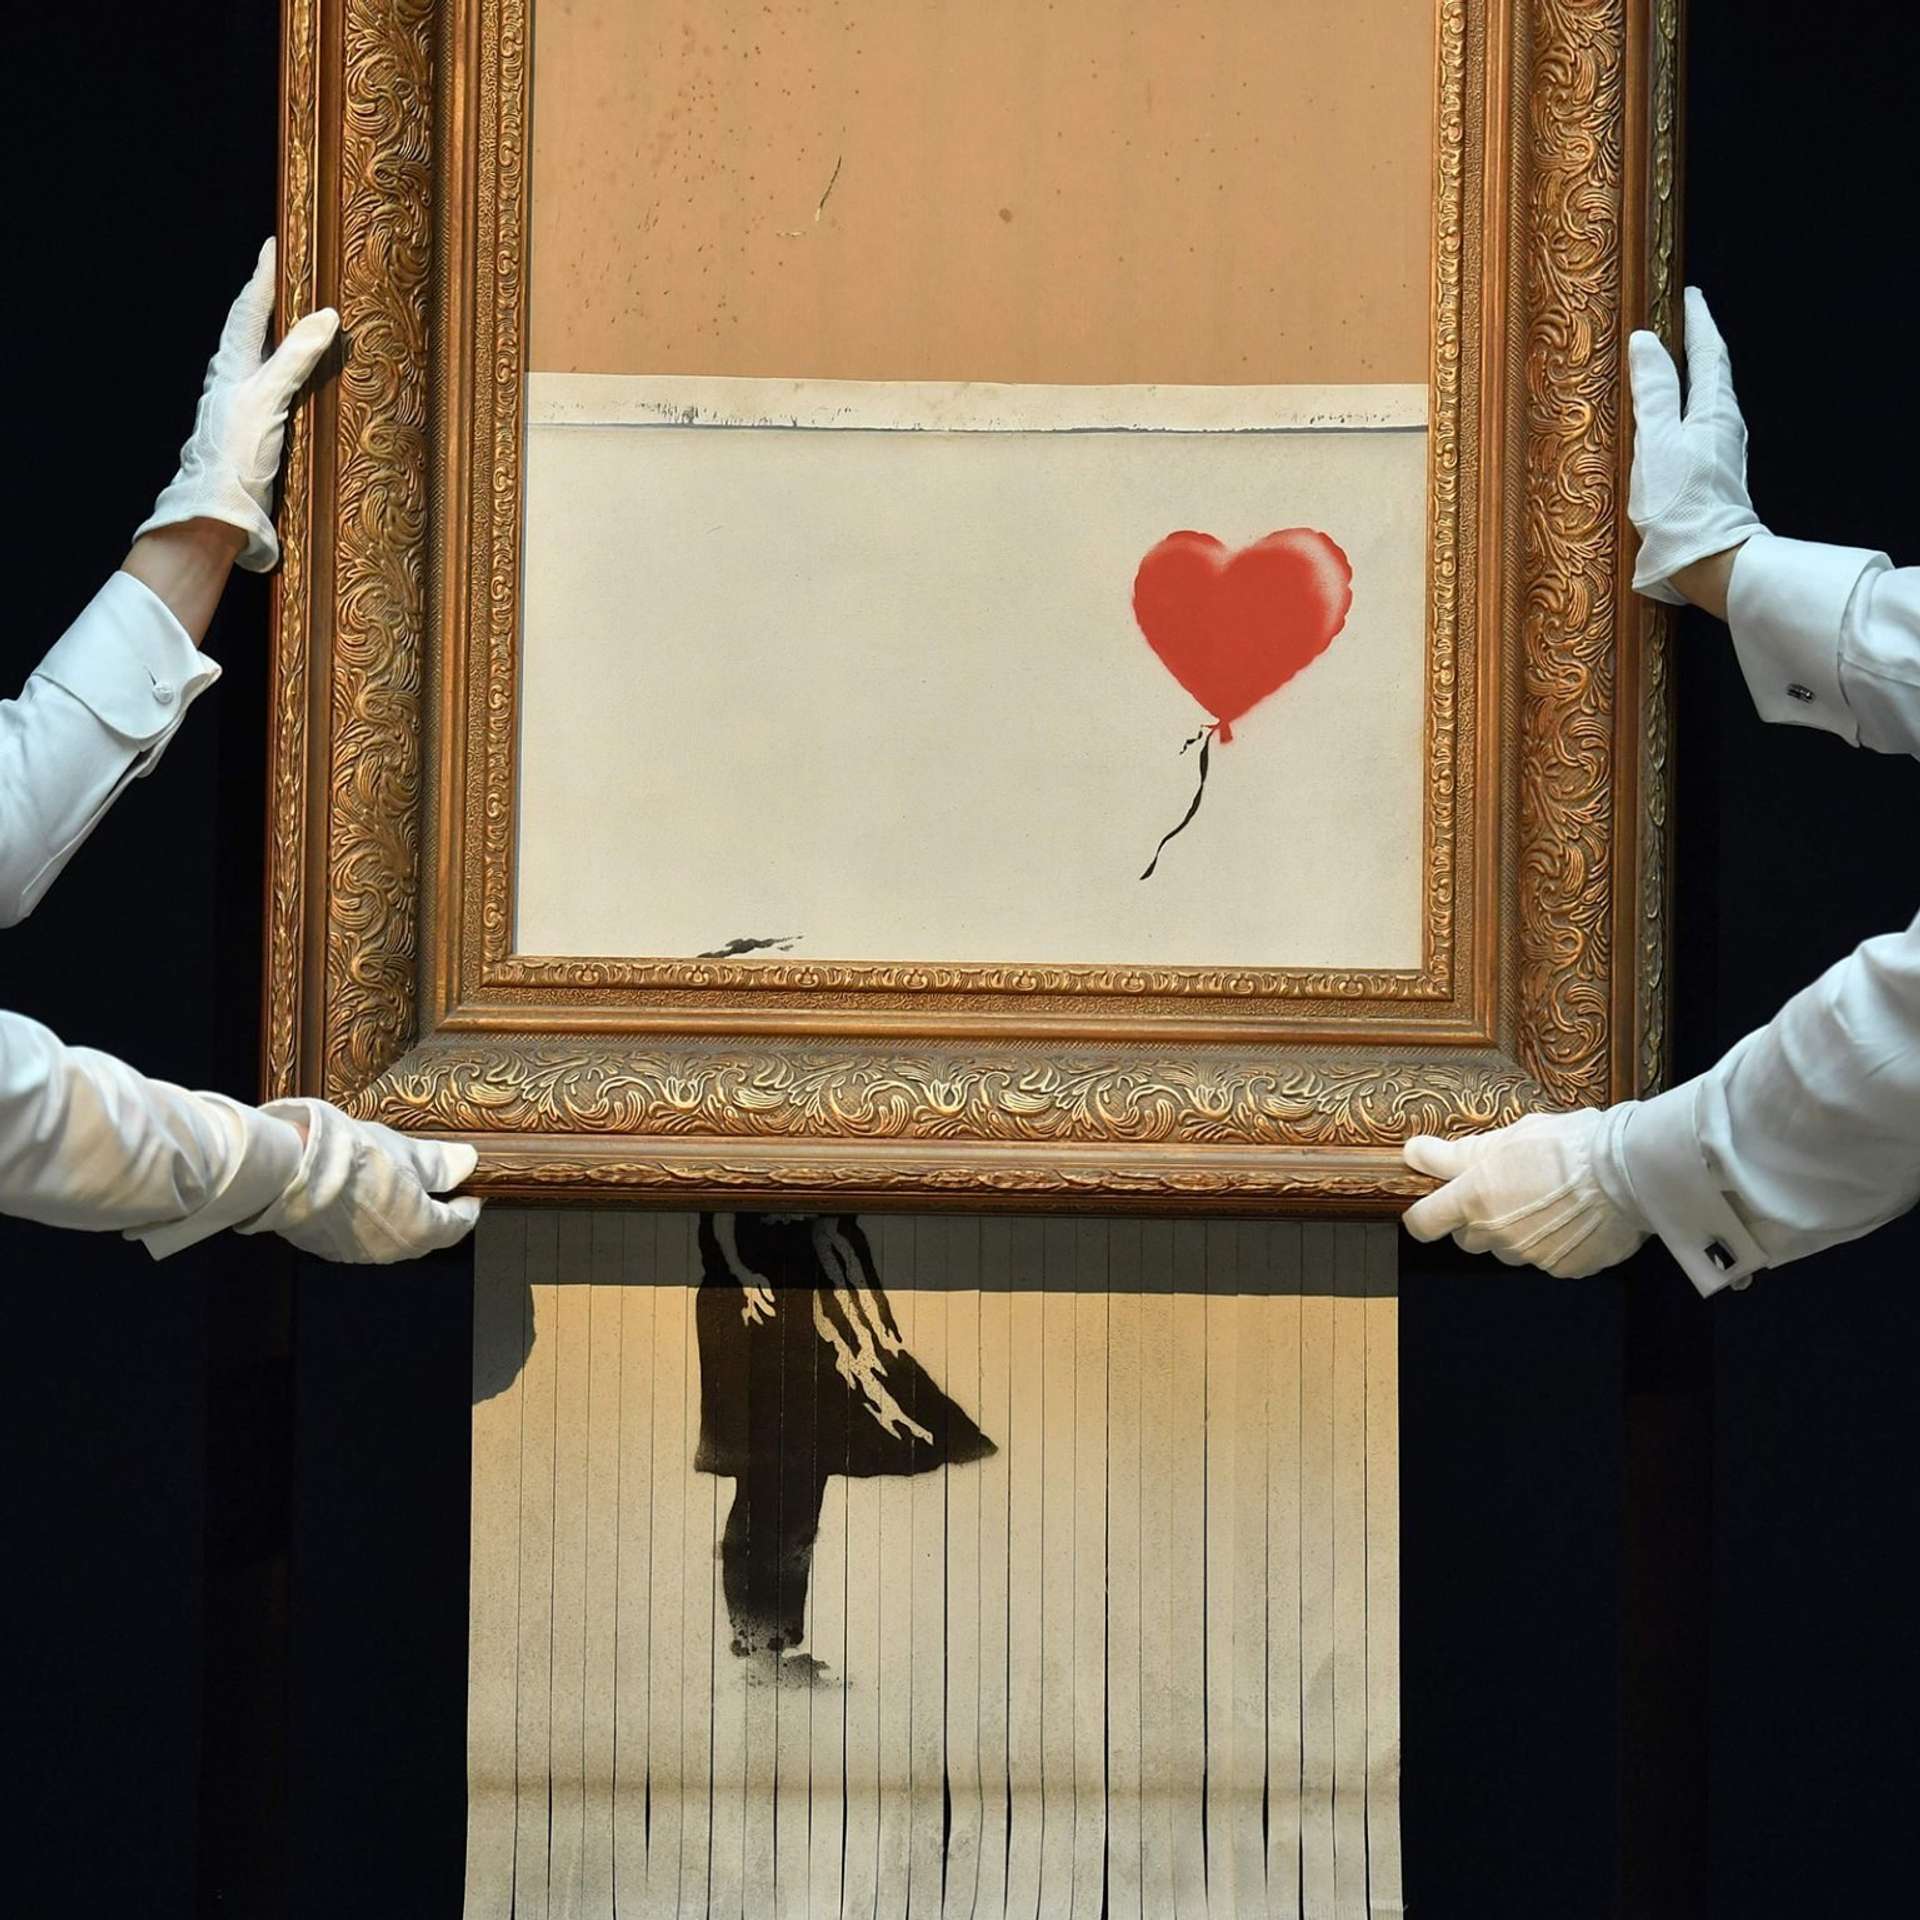 An image of Banksy's shredded Girl With Balloon artwork in the shredder frame, held by two Sotheby's art handlers.